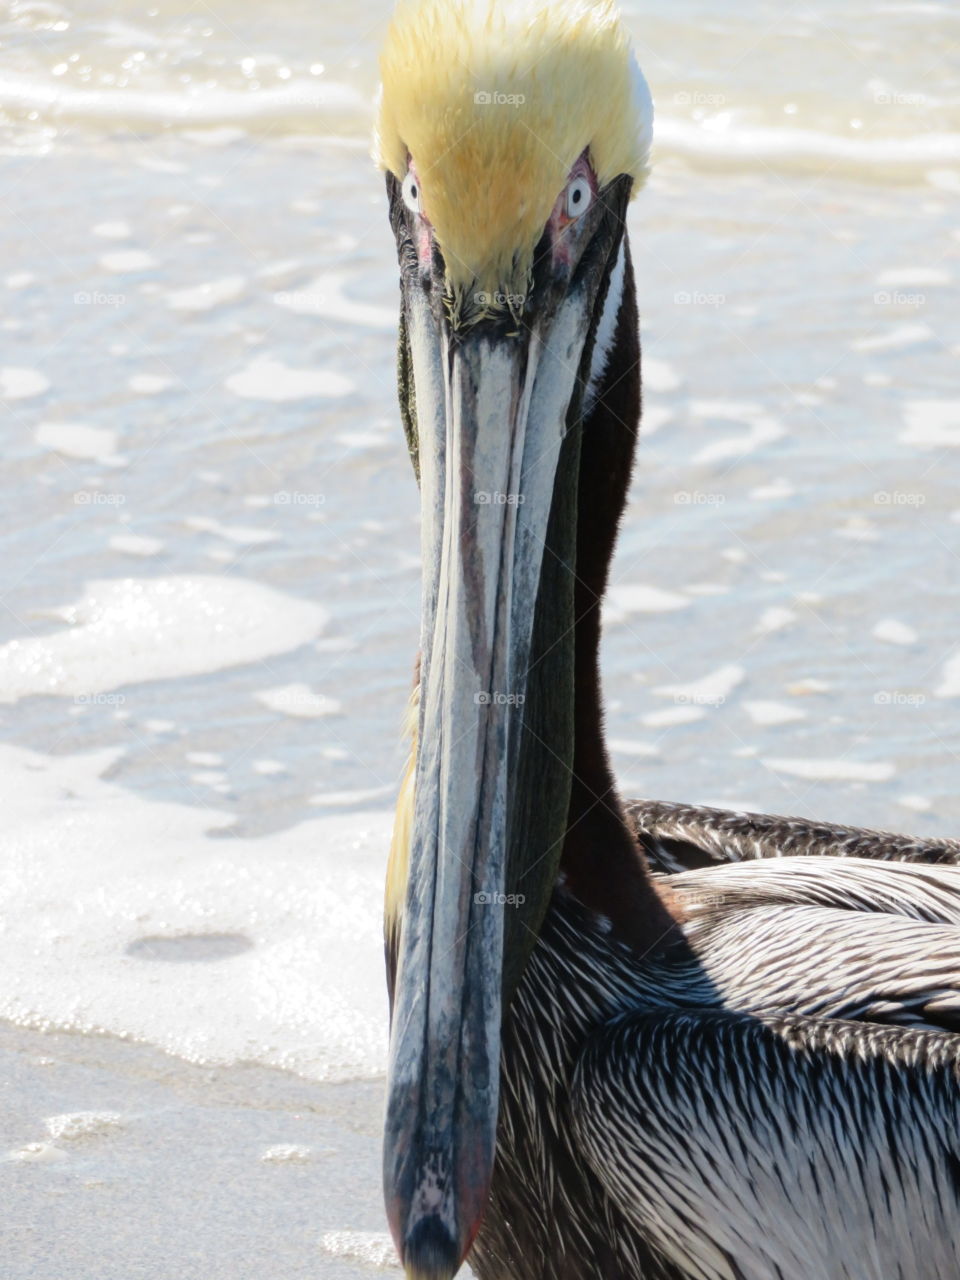 Eye to eye with a Pelican